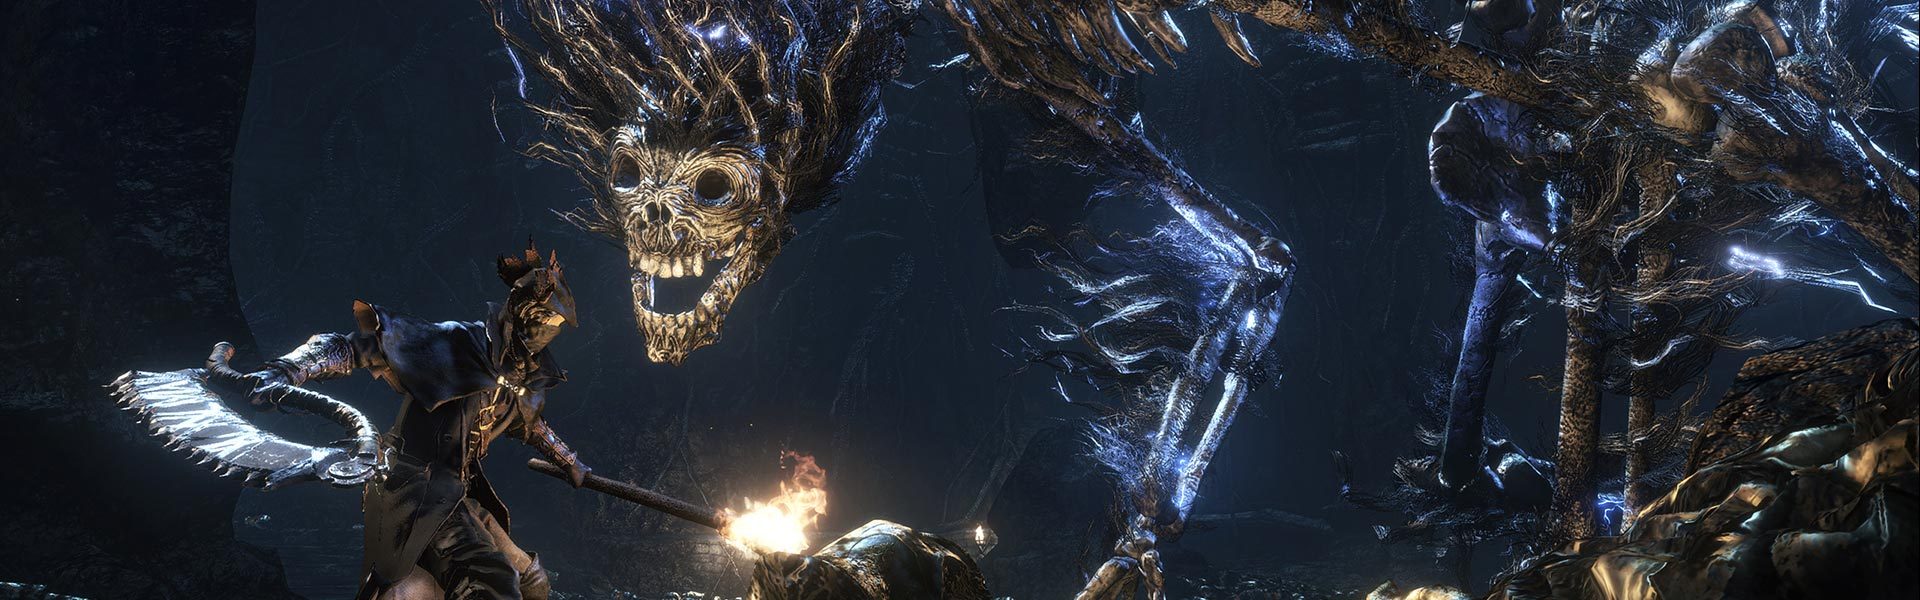 do bloodborne enemies level with you